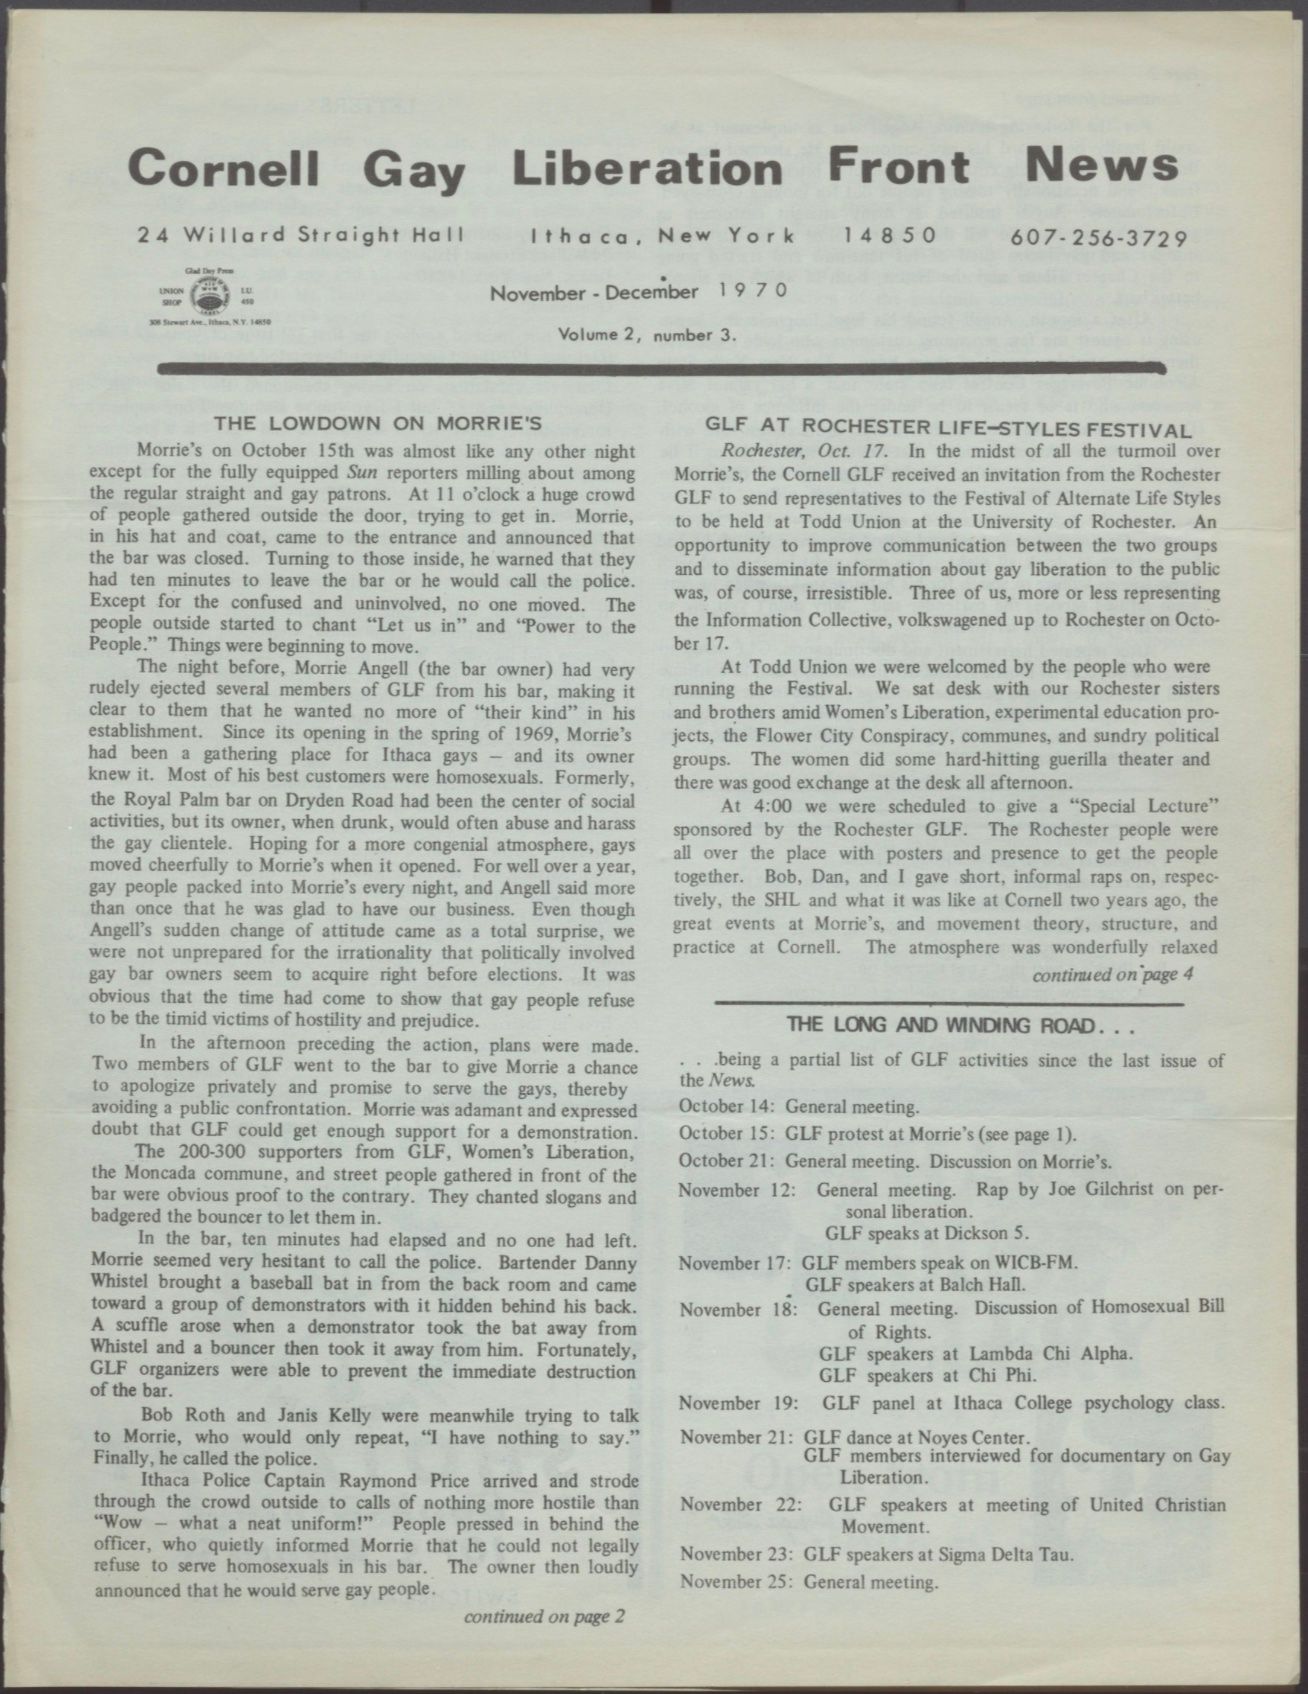 Cornell Gay Liberation Front News_November-December 1970_Page 1